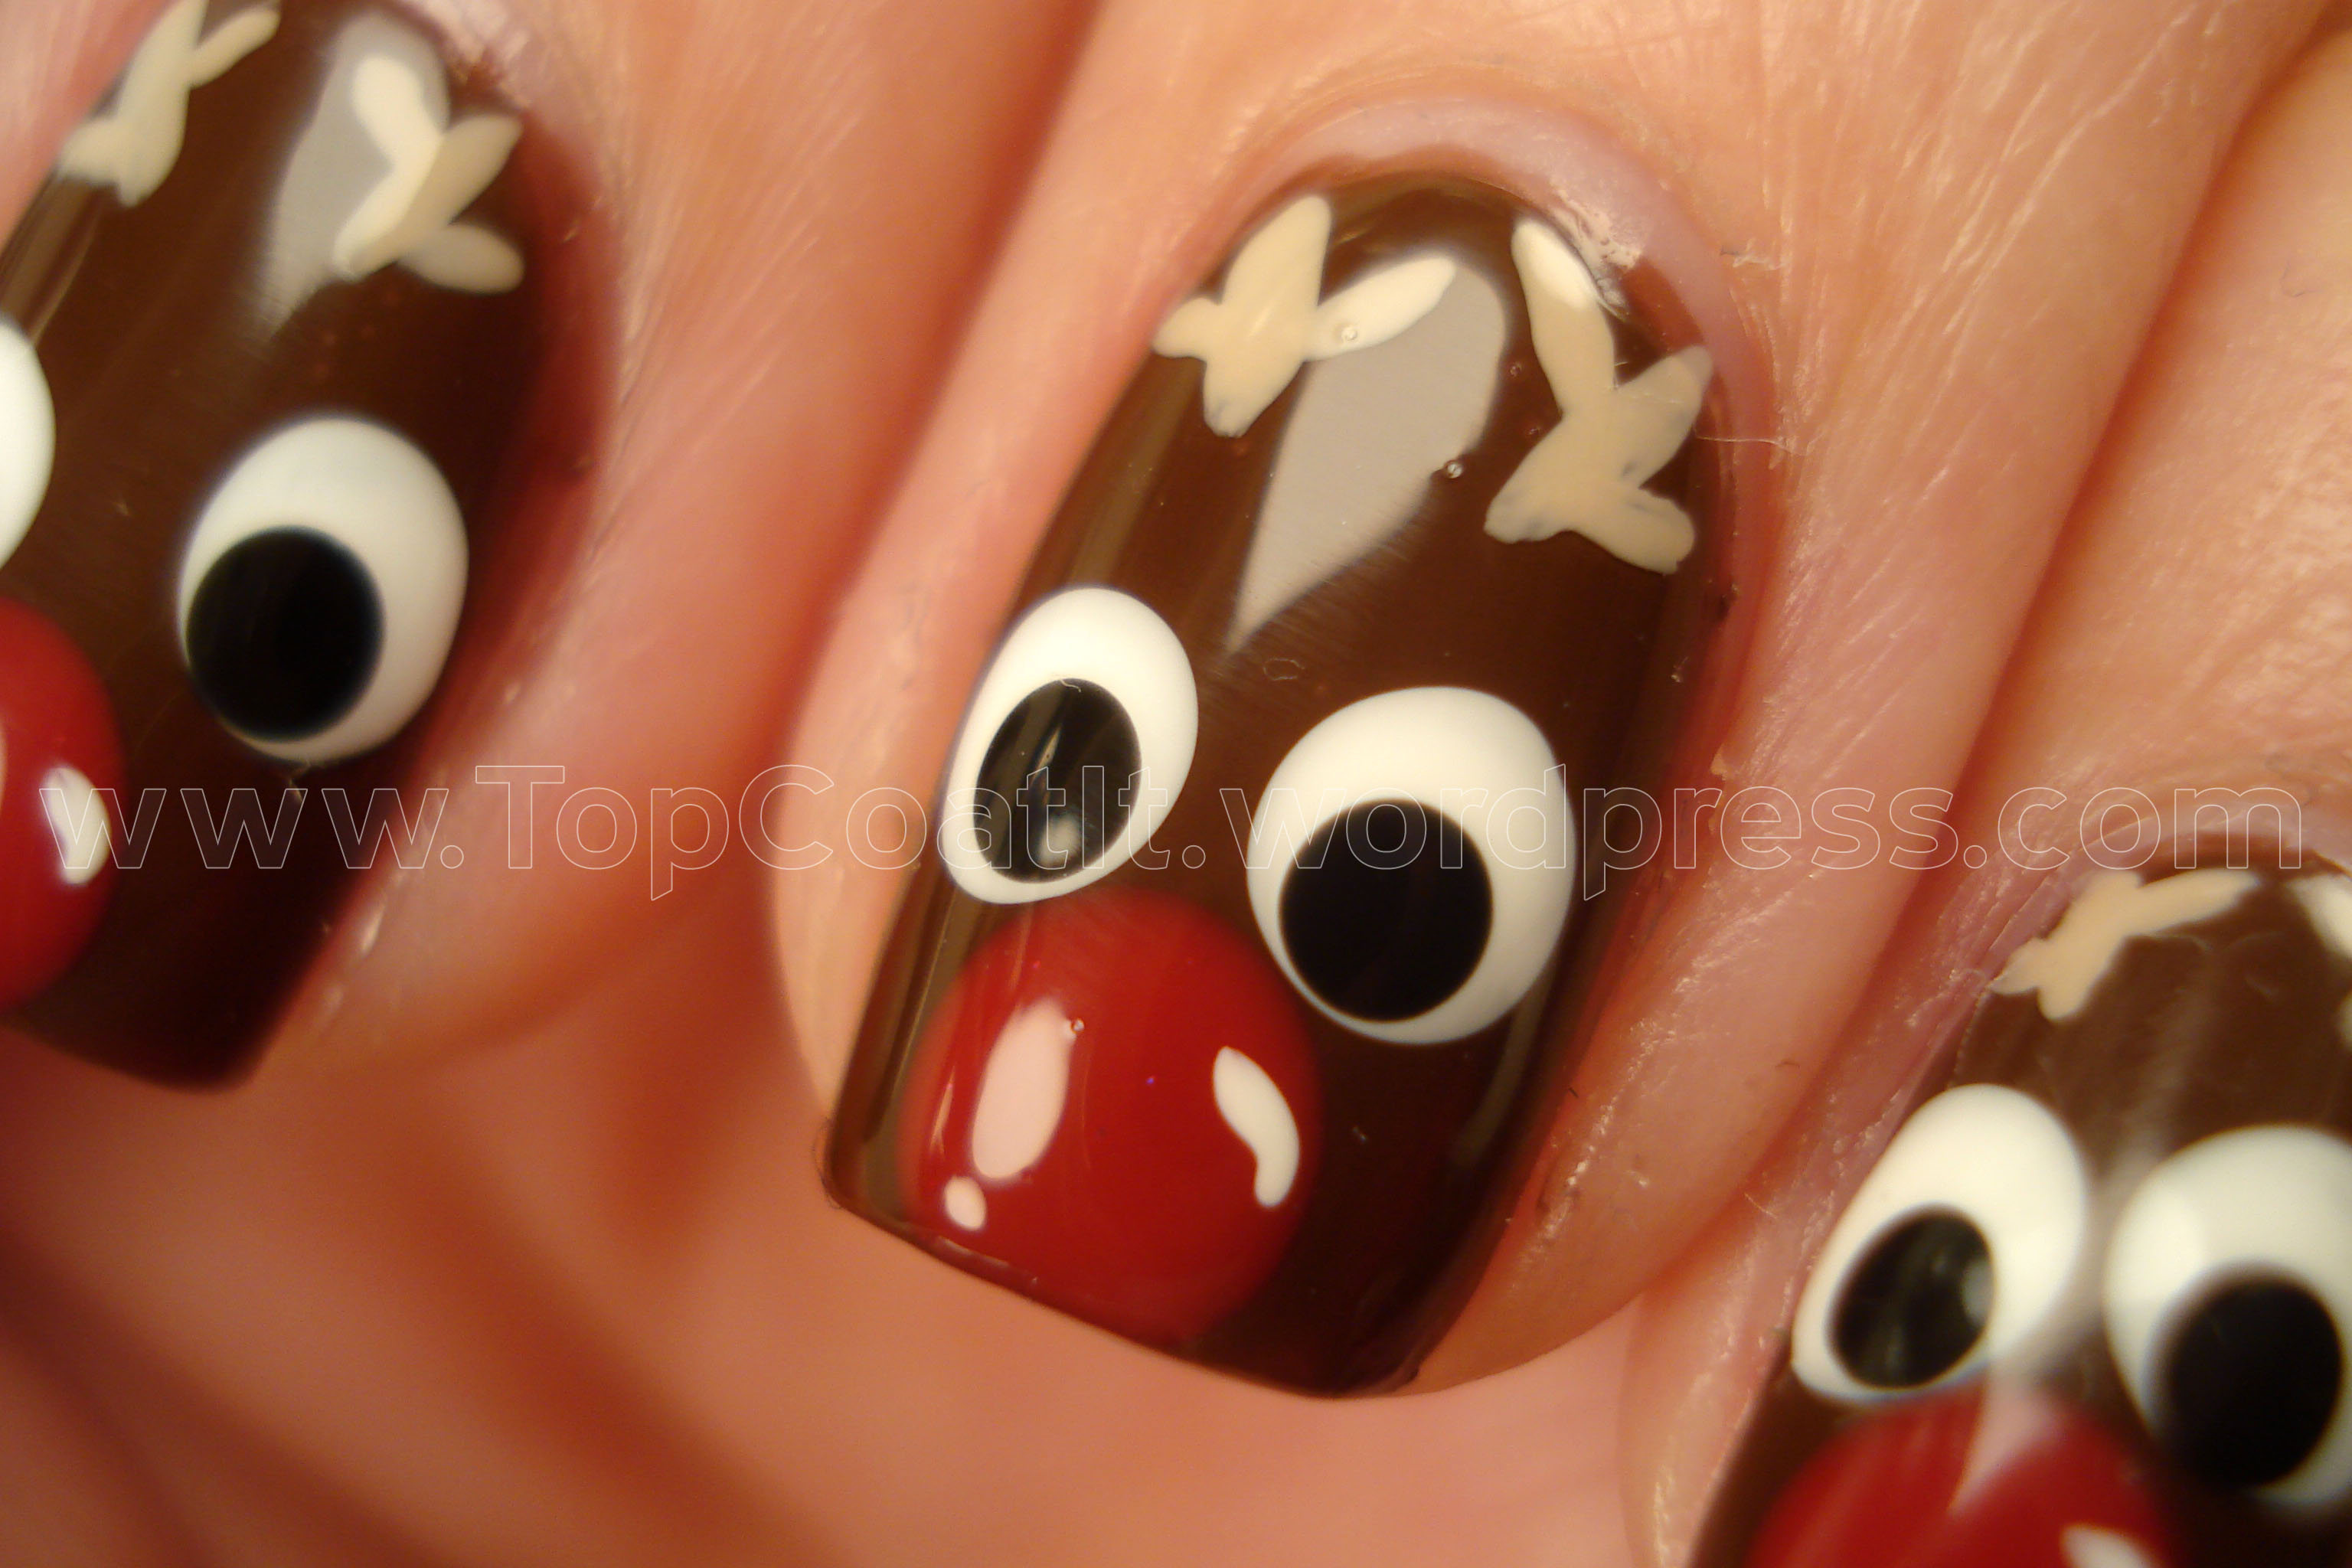 No Christmas nails collection is complete without Rudolph. I’ve seen 